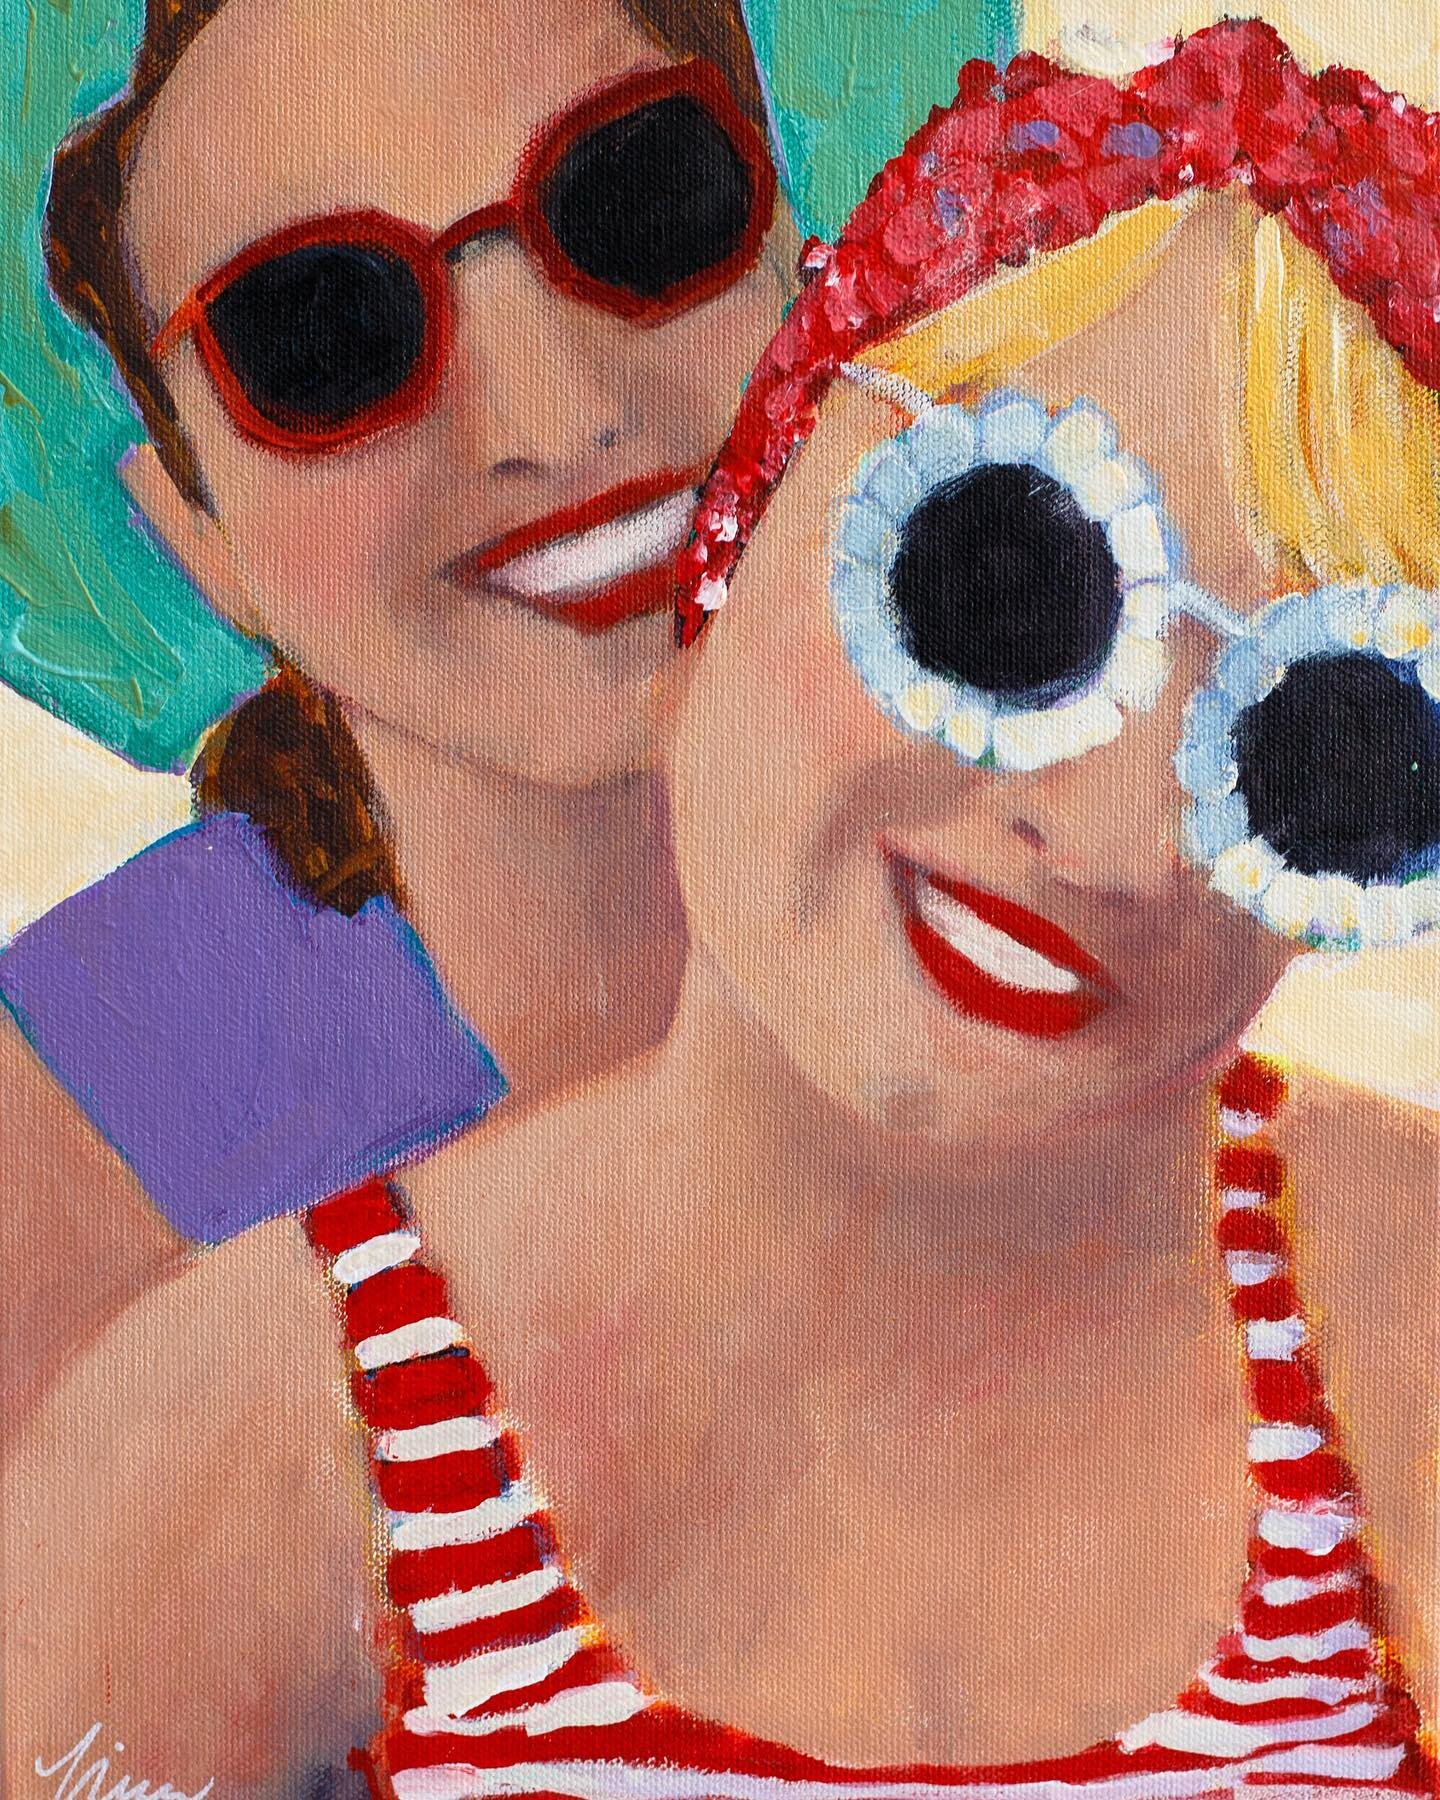 *SOLD* &ldquo;Summer Girls&rdquo; 🎊

I had the pleasure of catching up with a fellow artist today and was so pleasantly surprised when she decided to buy this little gem after our conversation.🩷 thank you, Claire! #glimmermoments✨